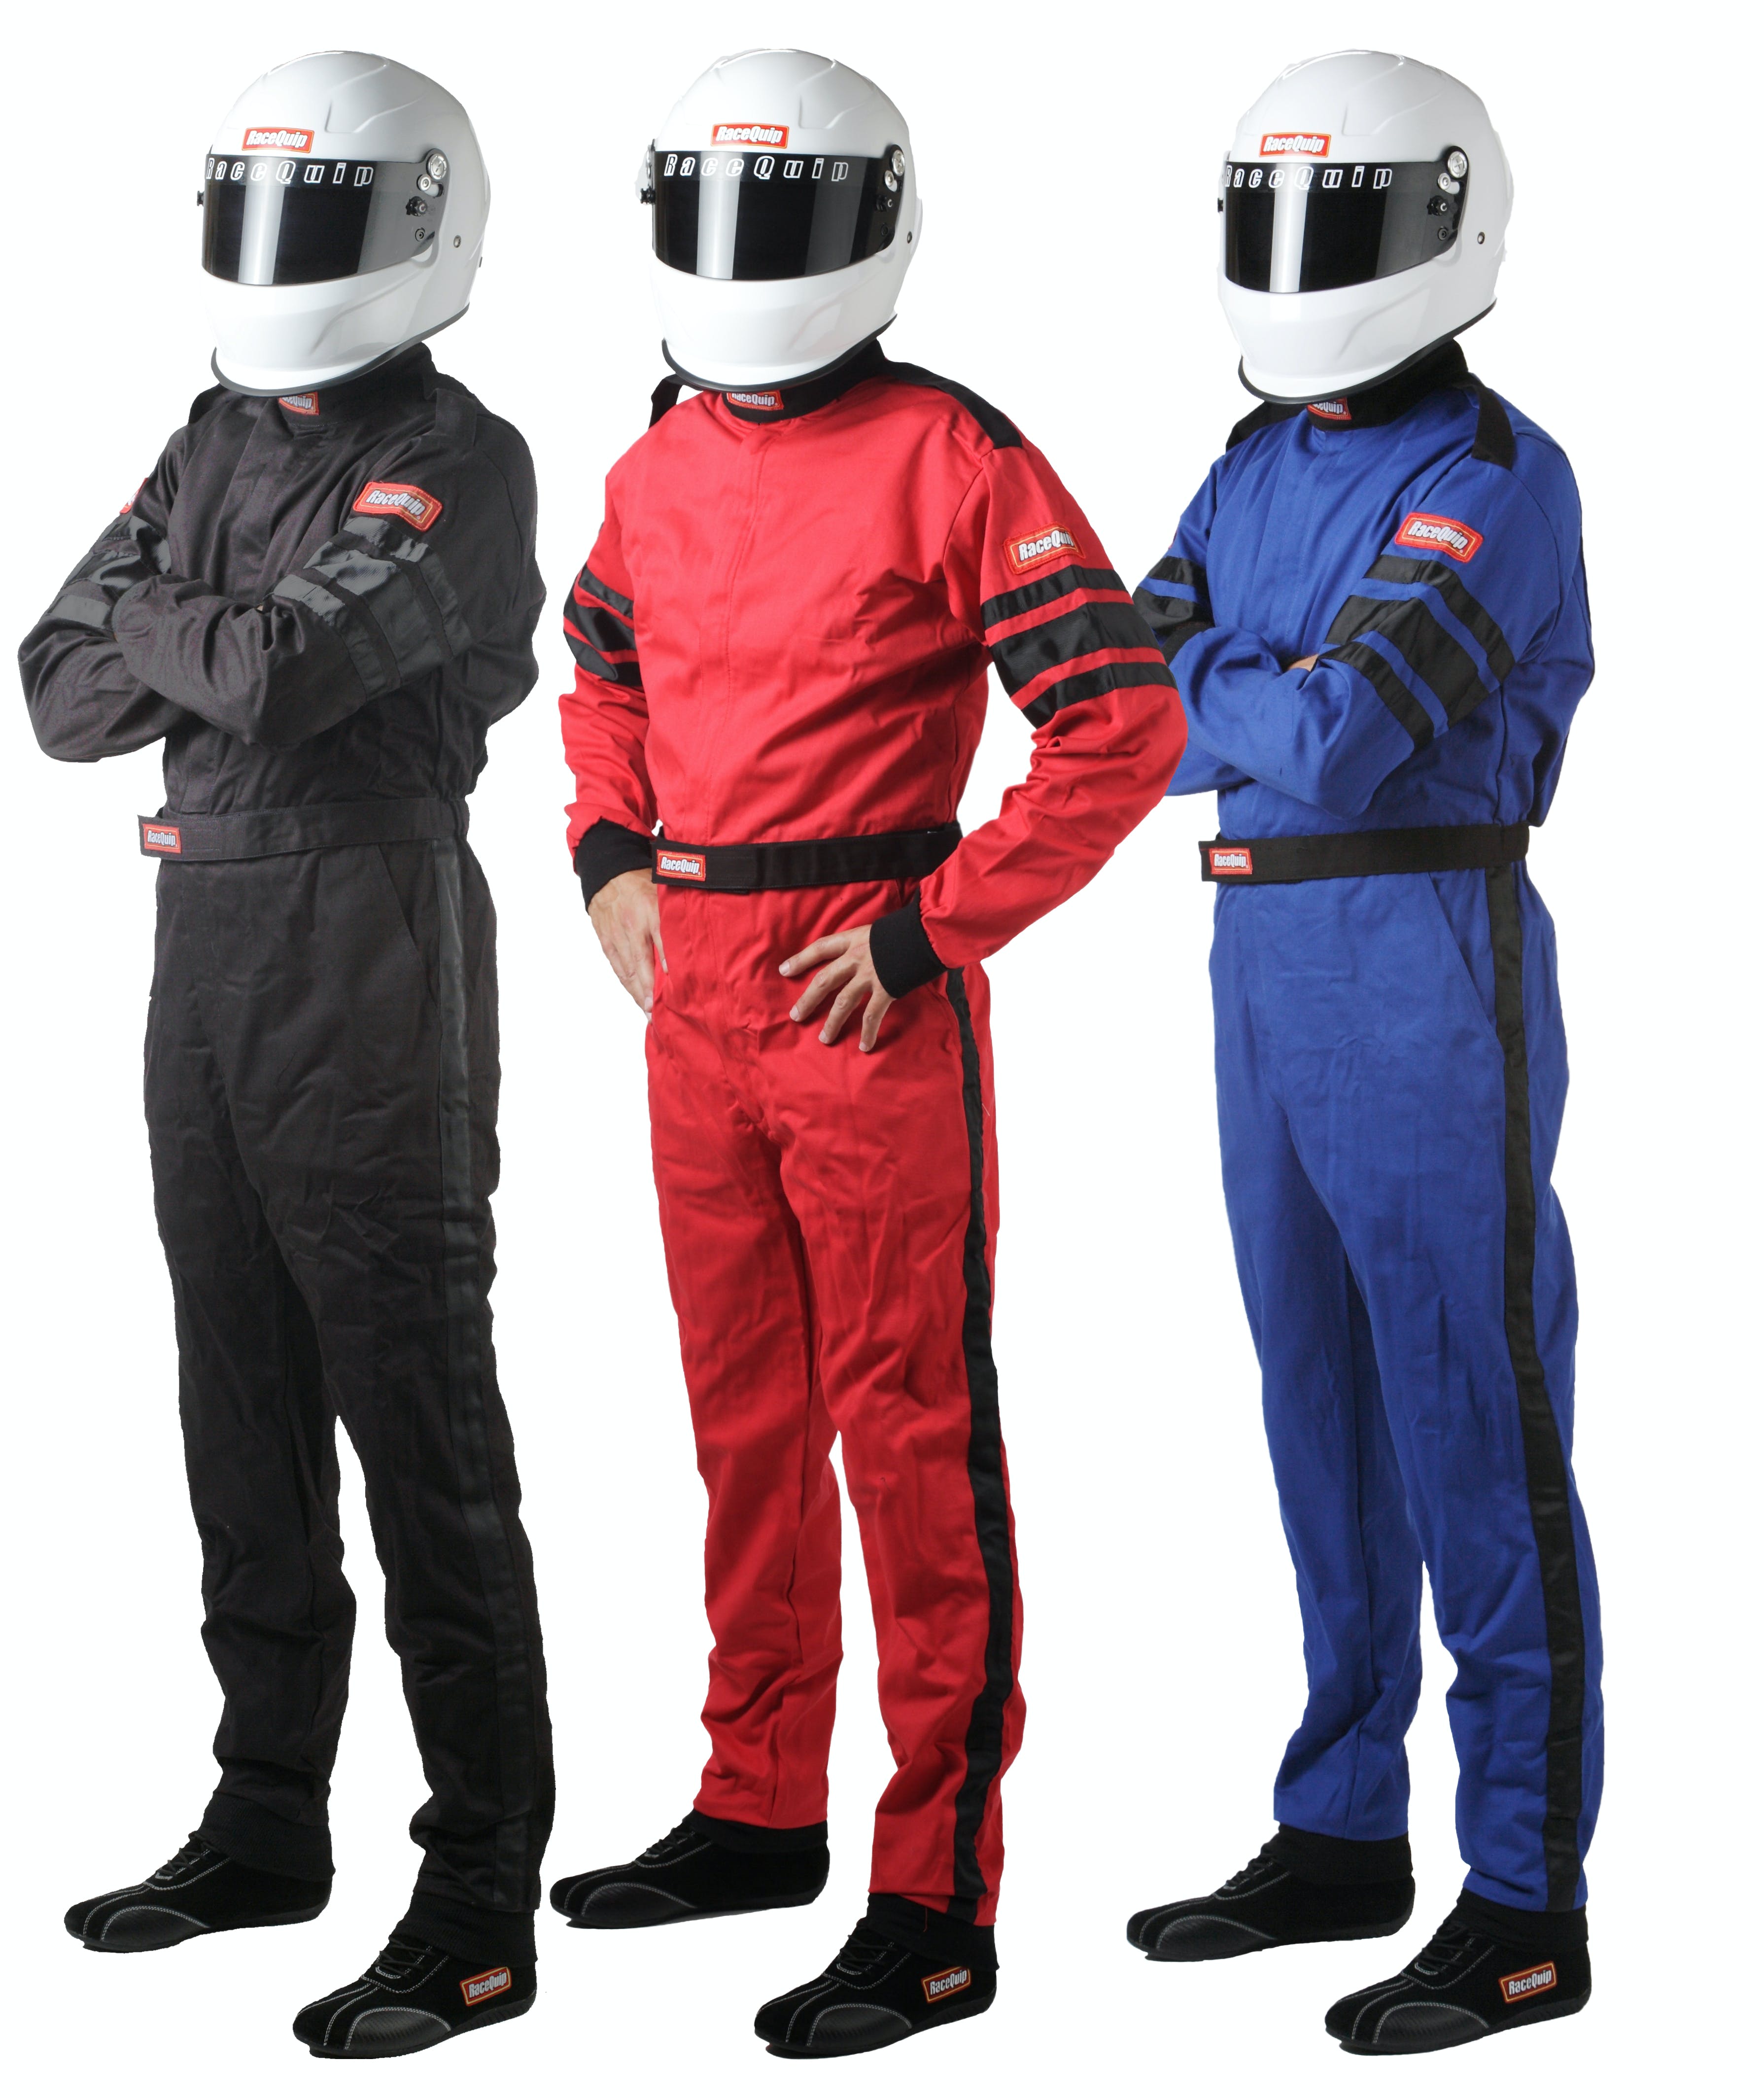 RaceQuip 110007 SFI-1 Pyrovatex One-Piece Single-Layer Racing Fire Suit (Black, XX-Large)